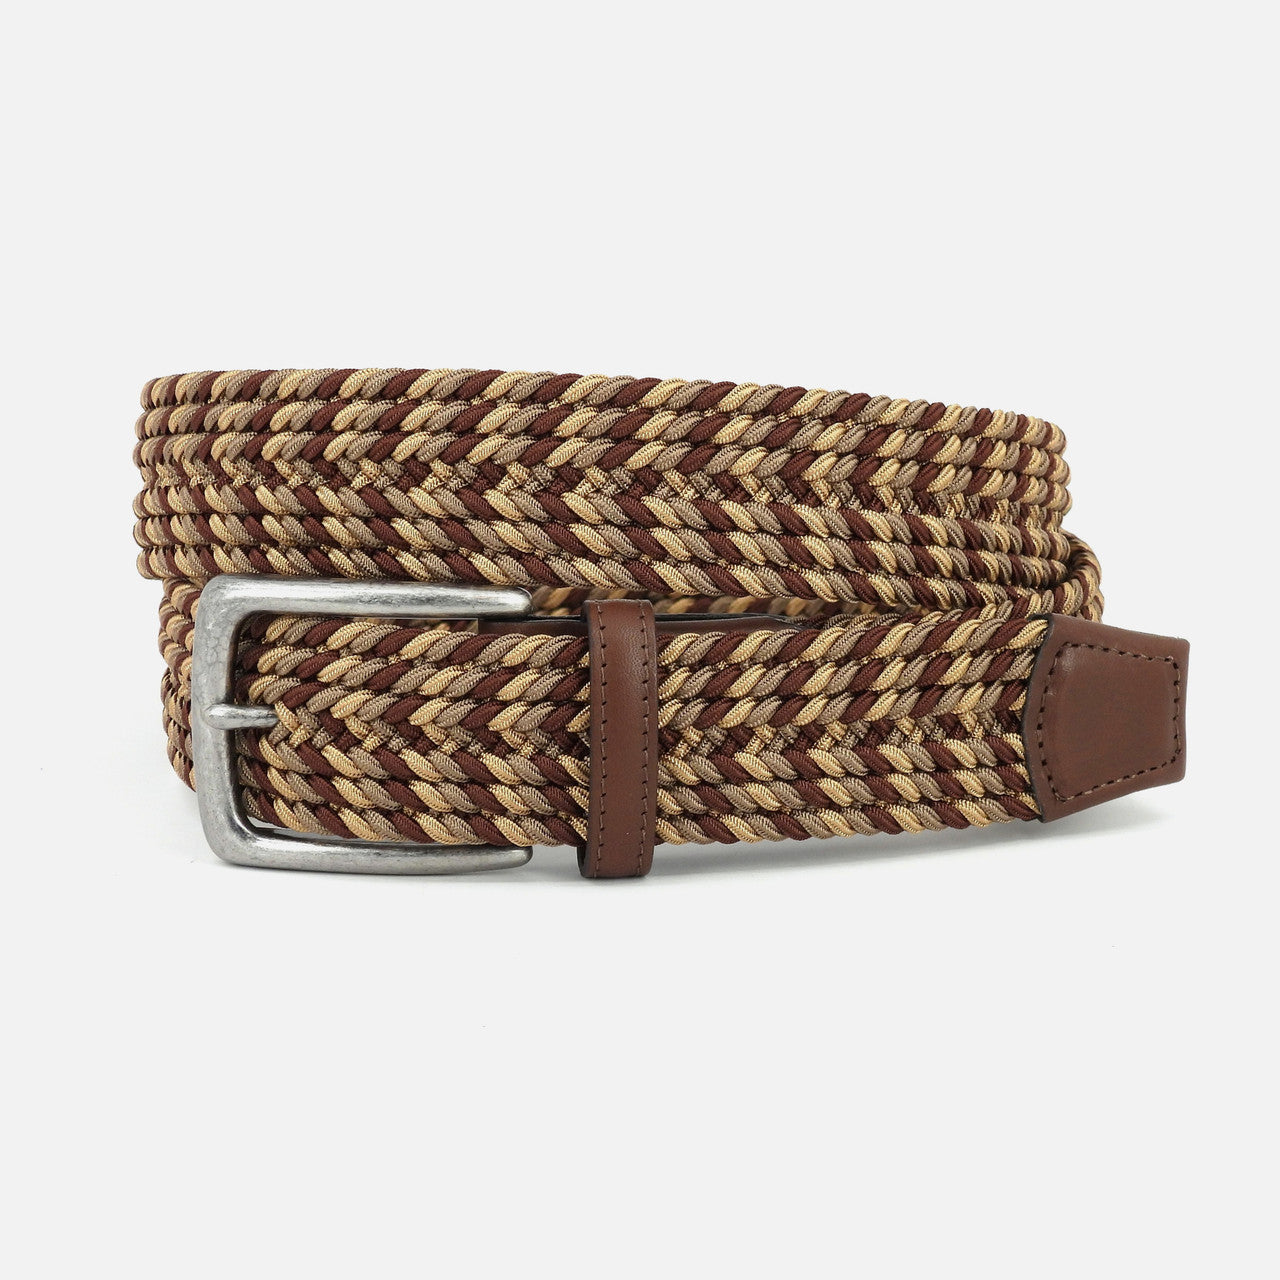 Italian Braided Stretch Rayon Casual Belt in Brown Multi by Torino Leather